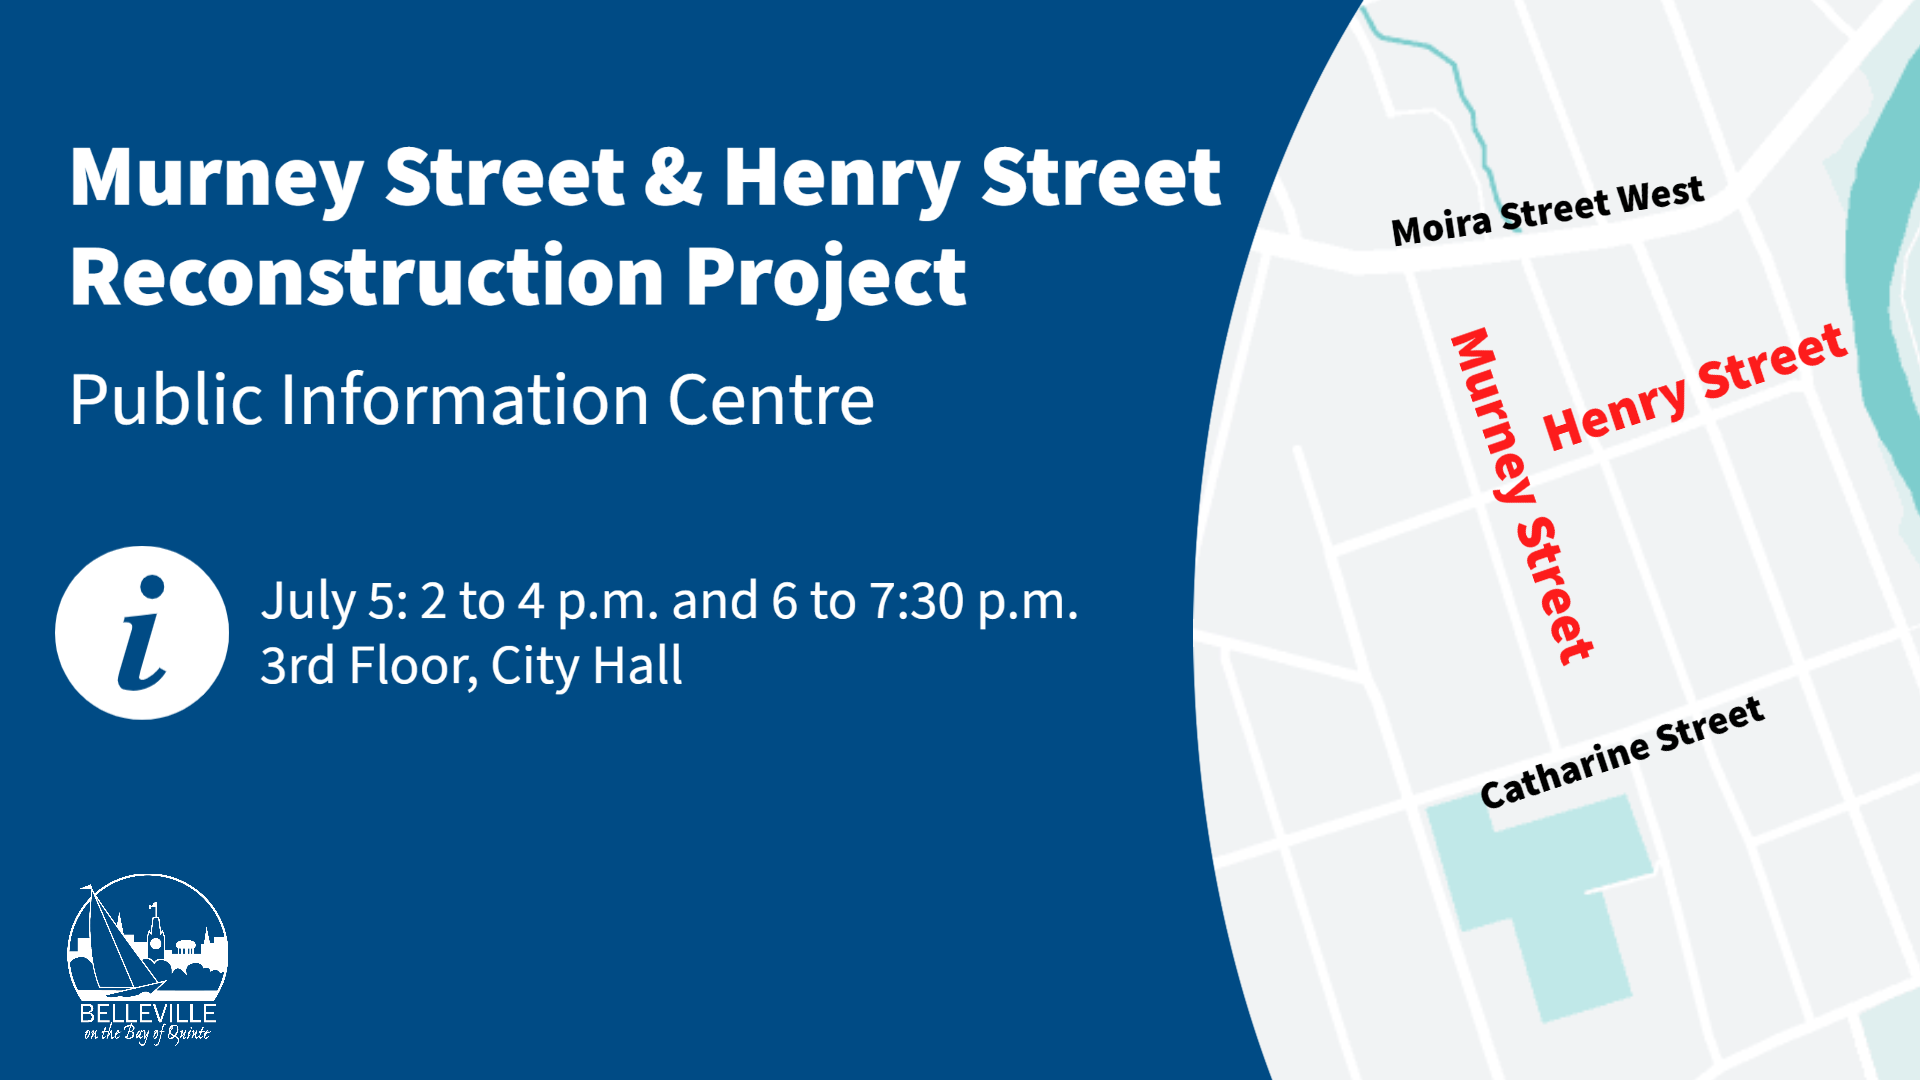 Poster for the Public Information Centre for the Murney Street & Henry Street Reconstruction Project on July 5 from 2 to 4 p.m. and 6 to 7:30 p.m. on the third floor of City Hall.